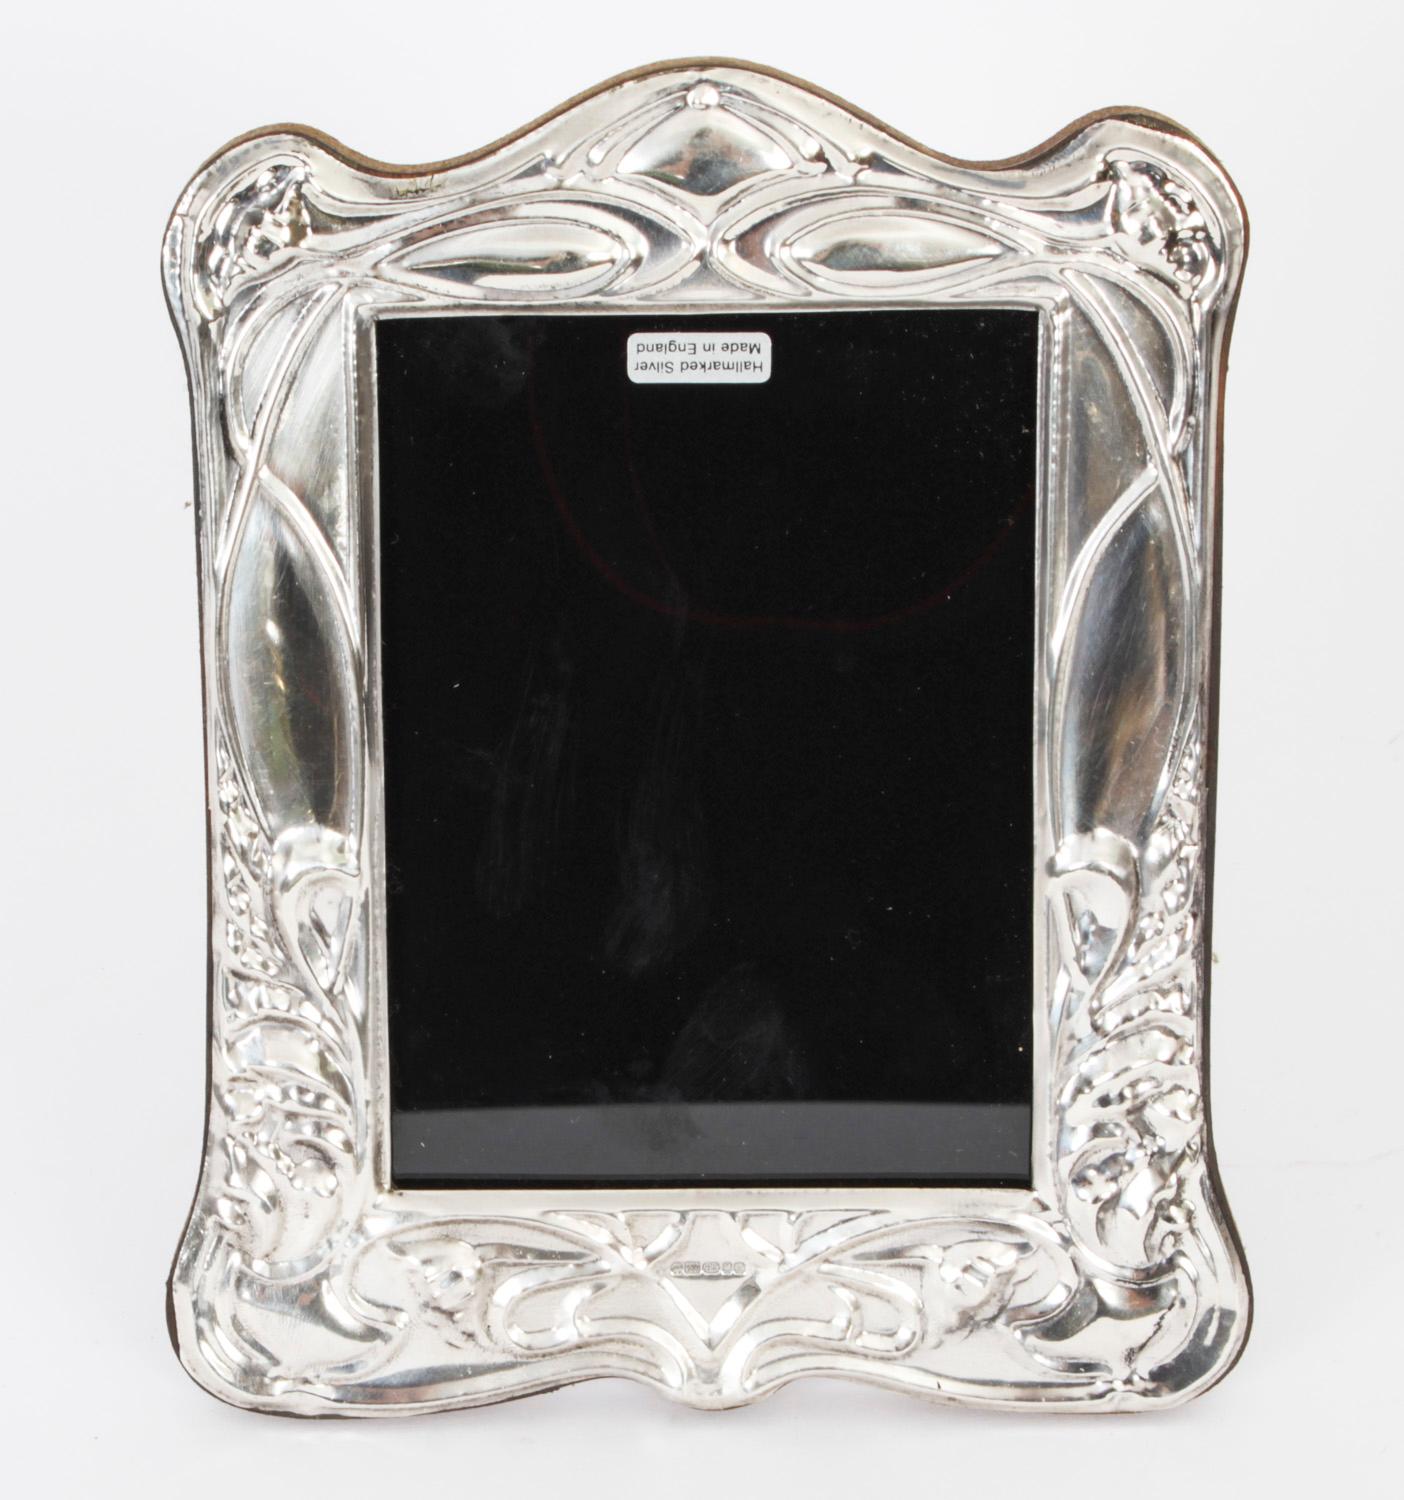 A truly superb pair of Vintage Art Nouveau sterling silver photo frames, by Harry Frane, London Dated 2011

The beautiful shaped rectangular photo frames are superbly decorated with typical Art Nouveau decorations stylised flowers.

An excellent